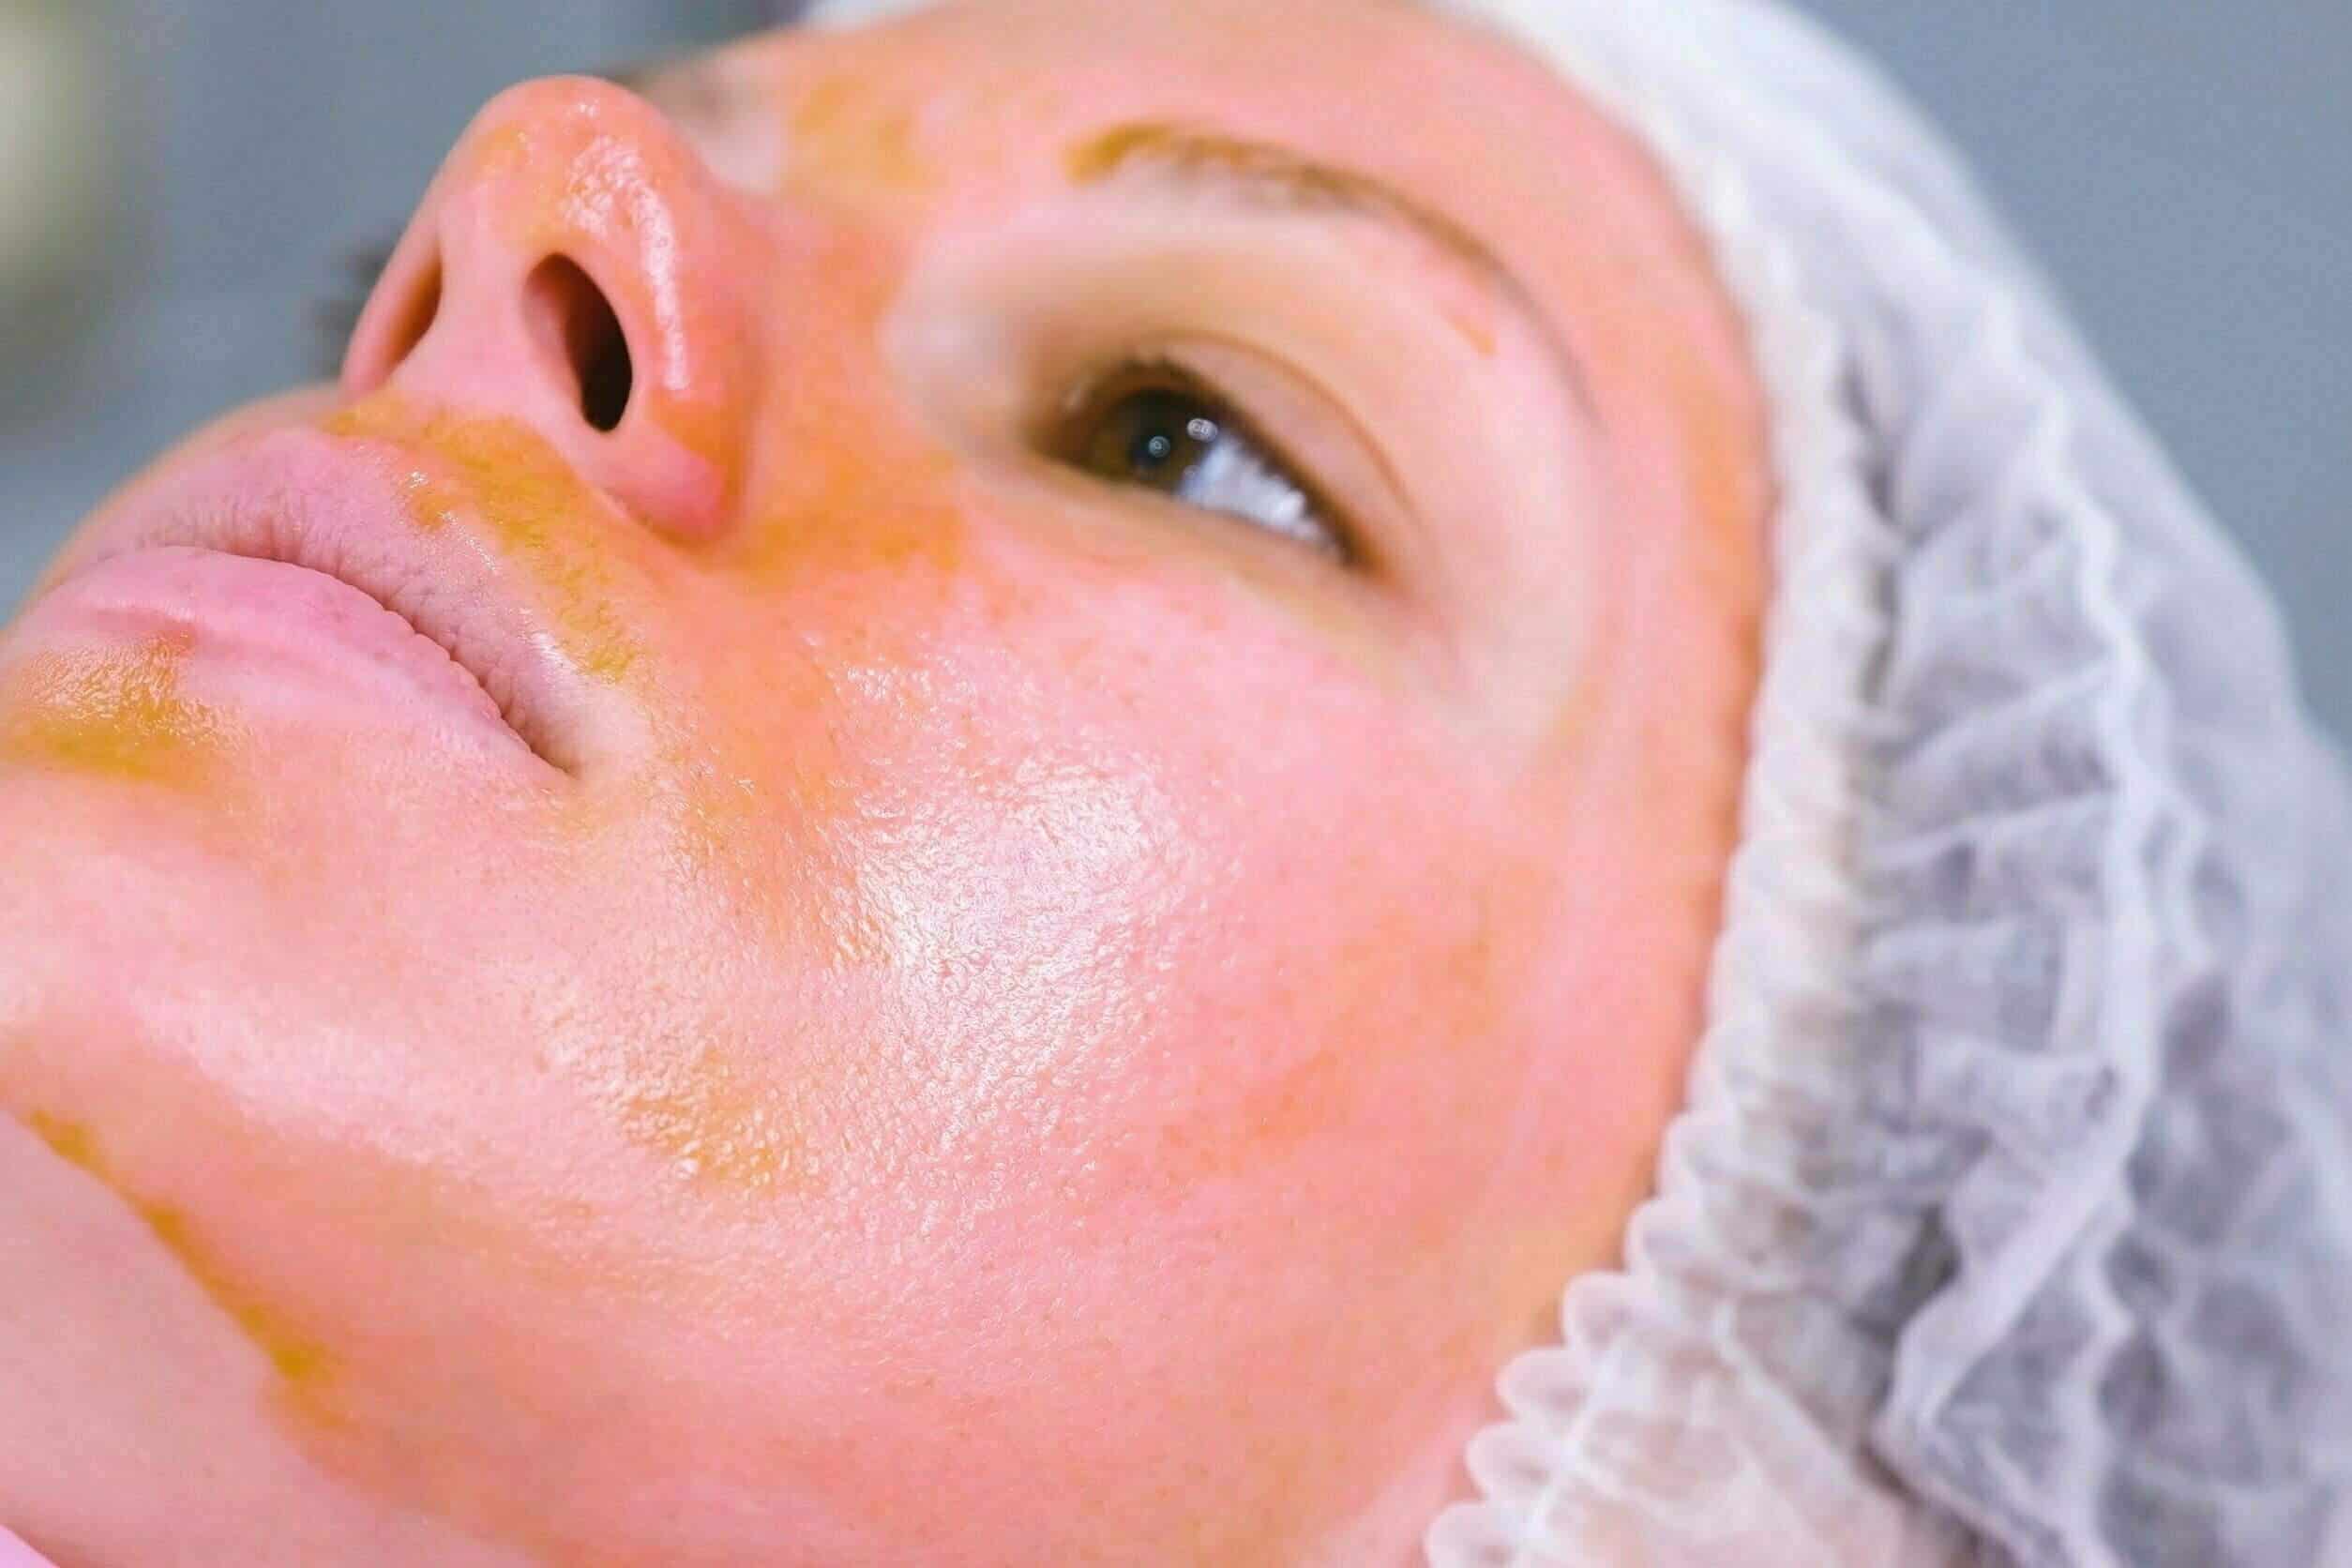 Chemical peeling o the woman’s face. Cleaning the face skin and lightening freckles skin. Close-up face. Side view.